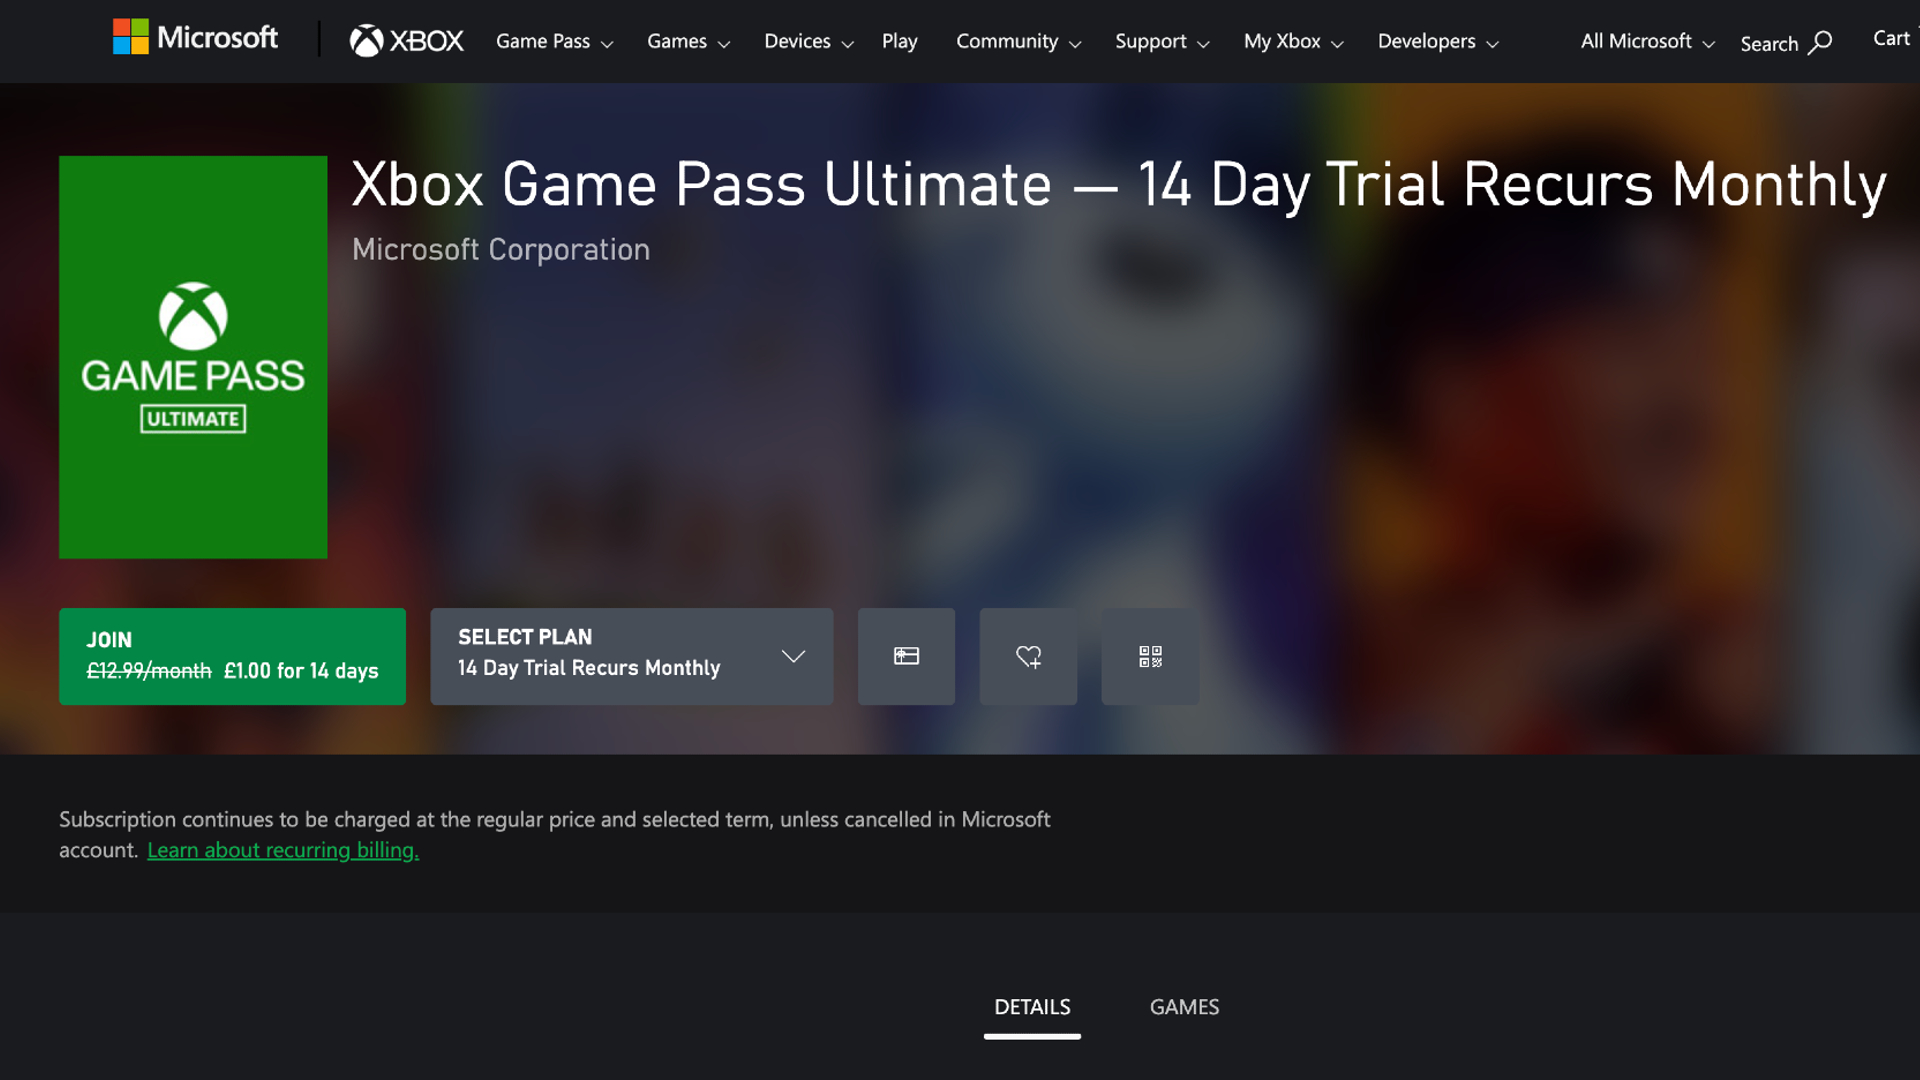 Microsoft's free trial offer for Game Pass Ultimate, which is now 14 days long